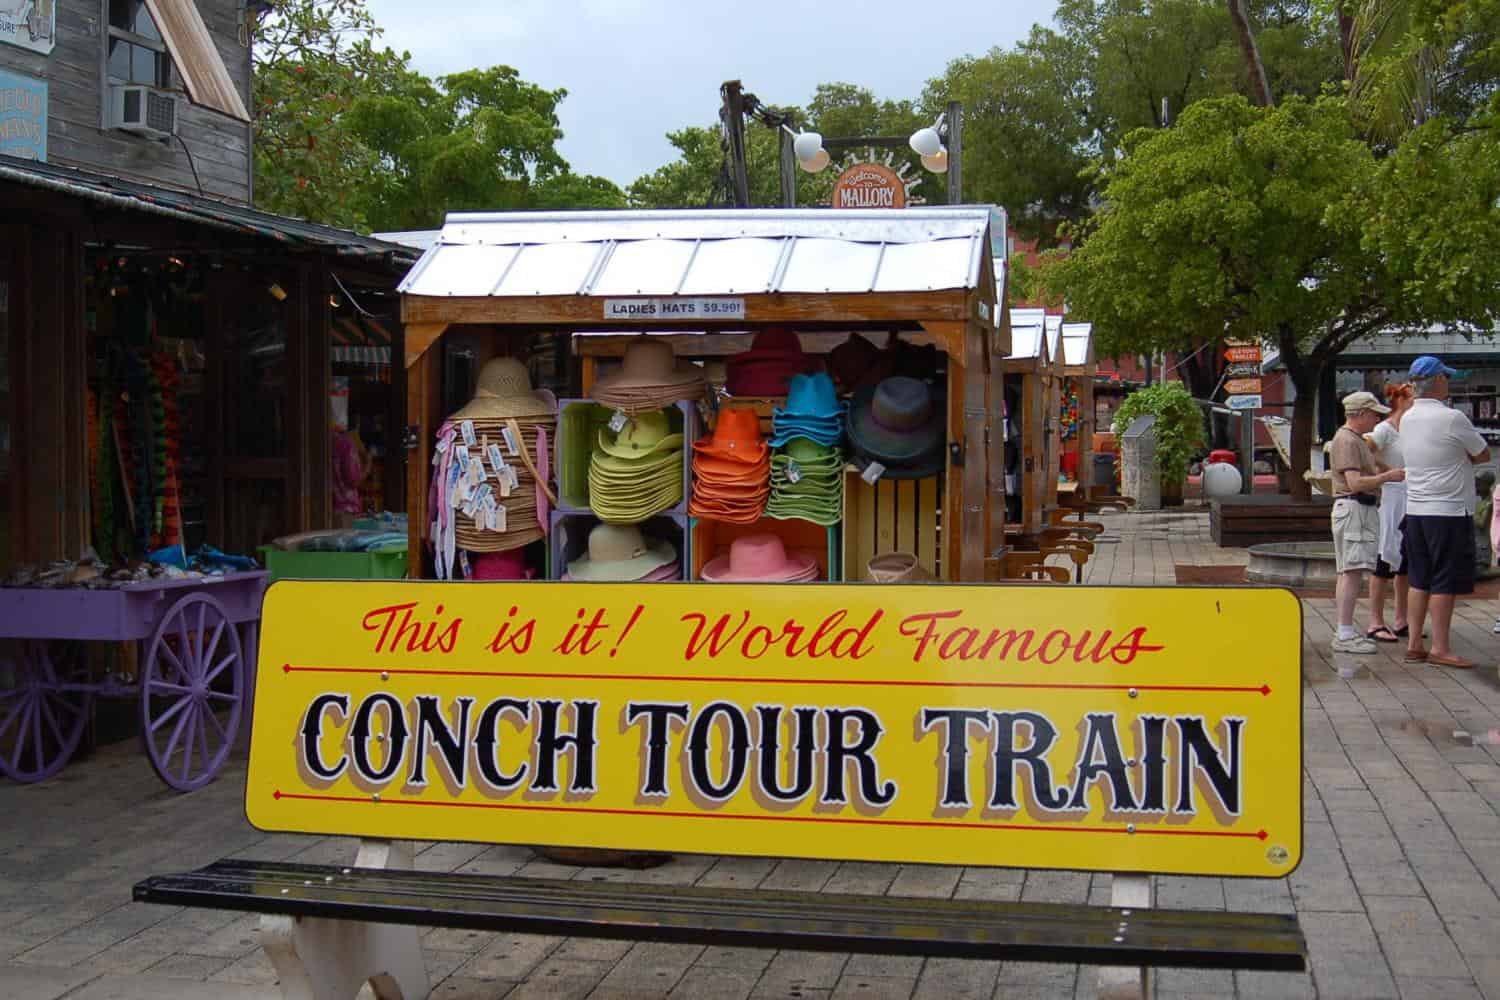 Day-Trip-to-Key-West-and-Conch-Train-Tour-from-Miami-by-Gray-Line-Miami